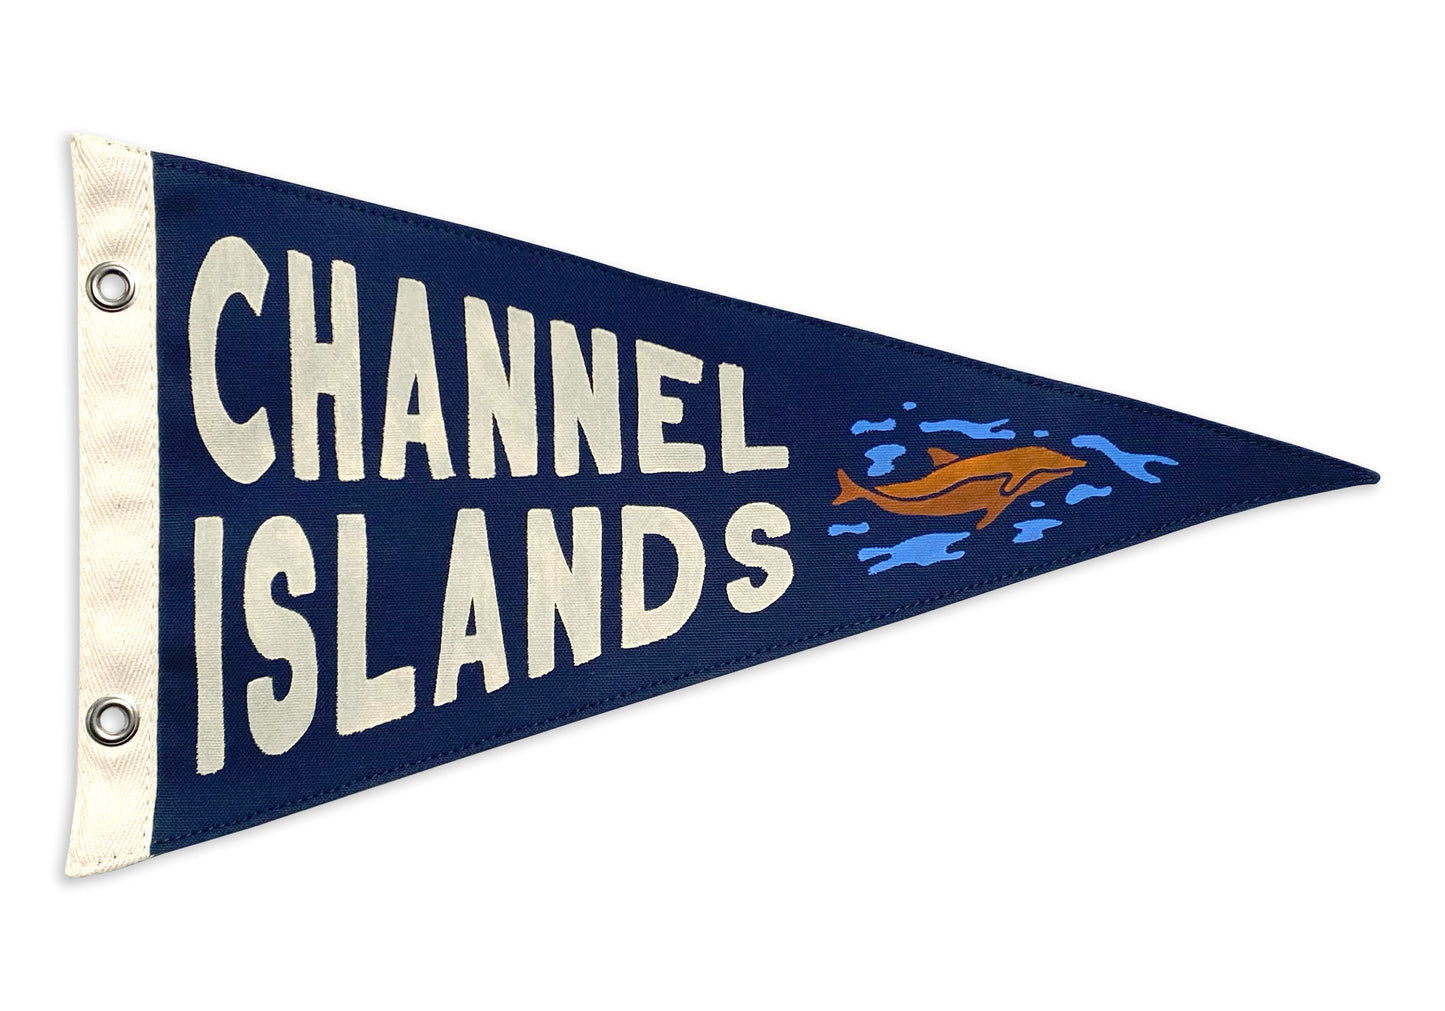 Channel Islands National Park Pennant